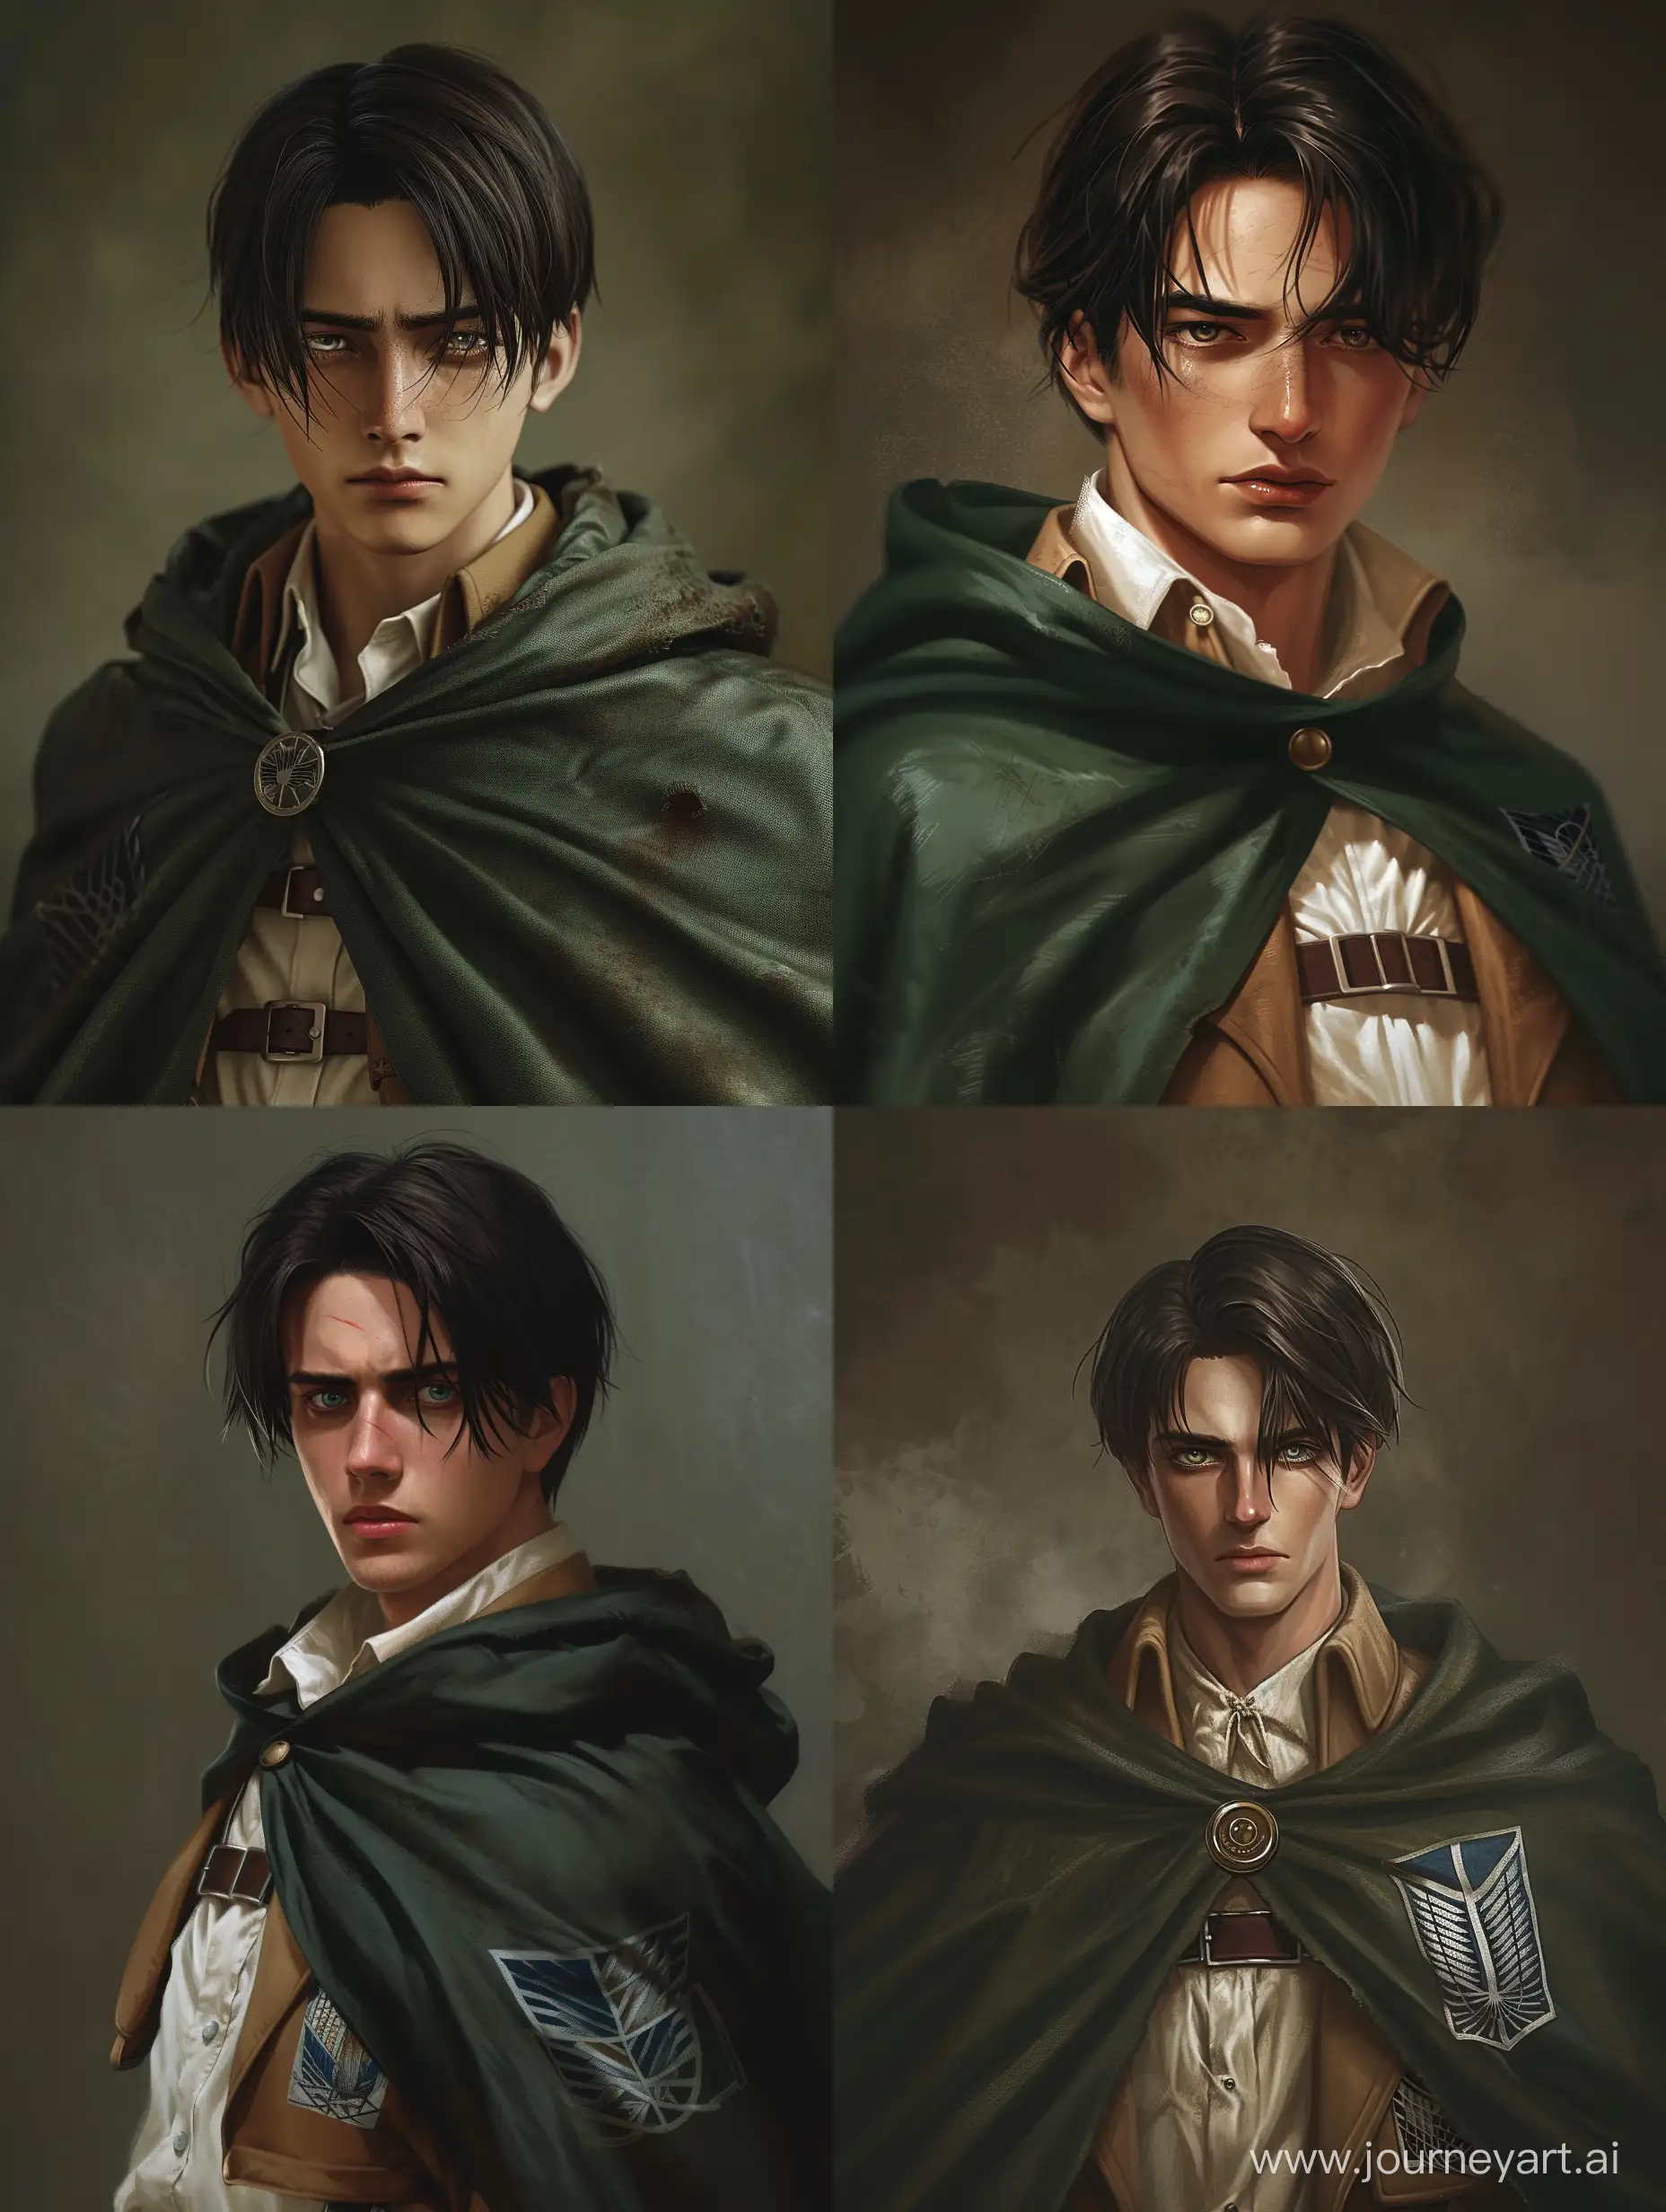 Realistic Levi Ackerman from Attack on Titan, in his 30s, with normal dark circles, slight mocking smirk, wearing survey corps cape